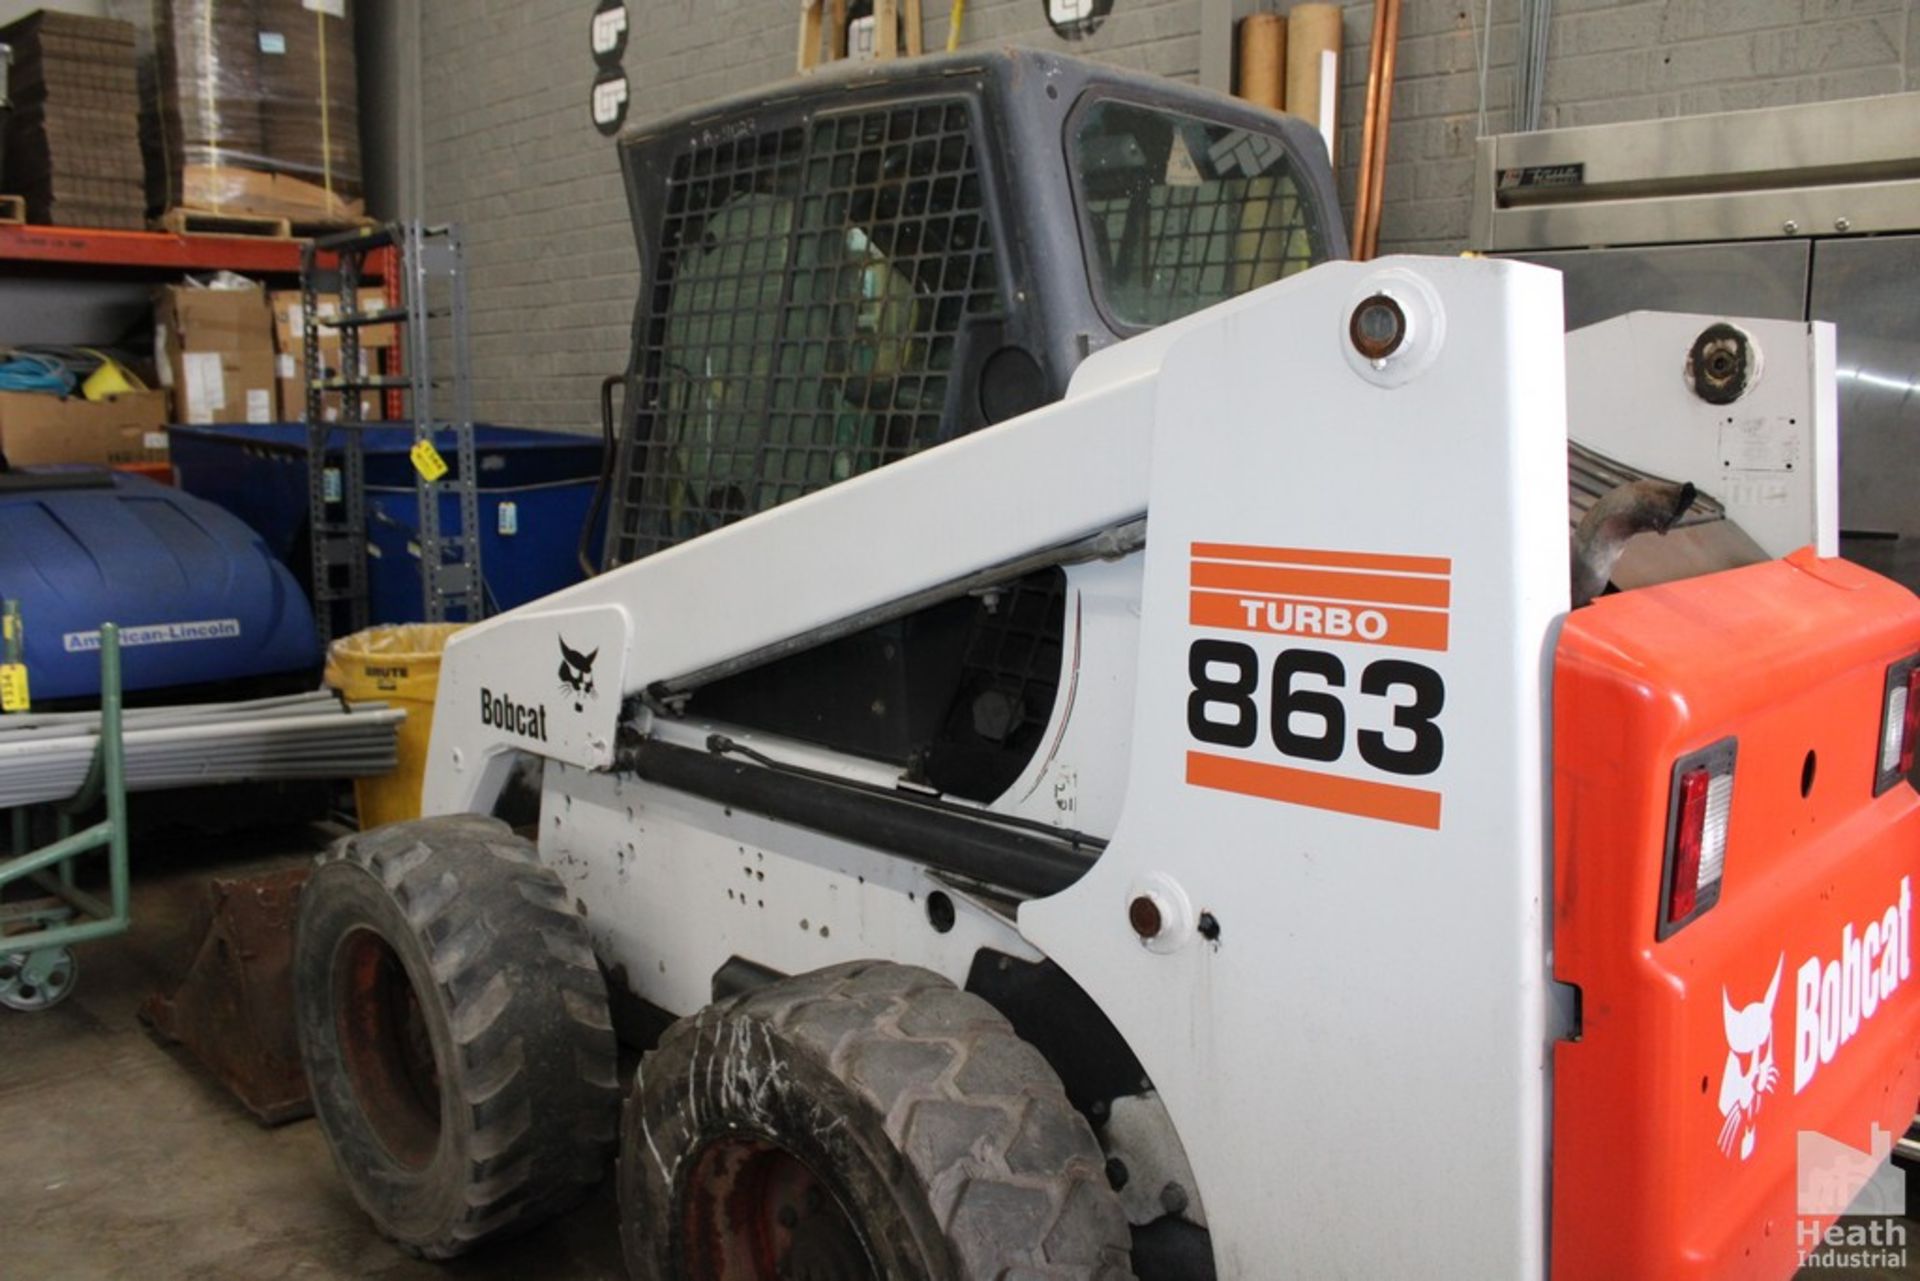 BOBCAT 863 SKID LOADER, DUETZ 4-CYLINDER DIESEL ENGINE, CAB WITH HEAT AND A/C, AUXILLARY HYDRAULICS - Image 4 of 5